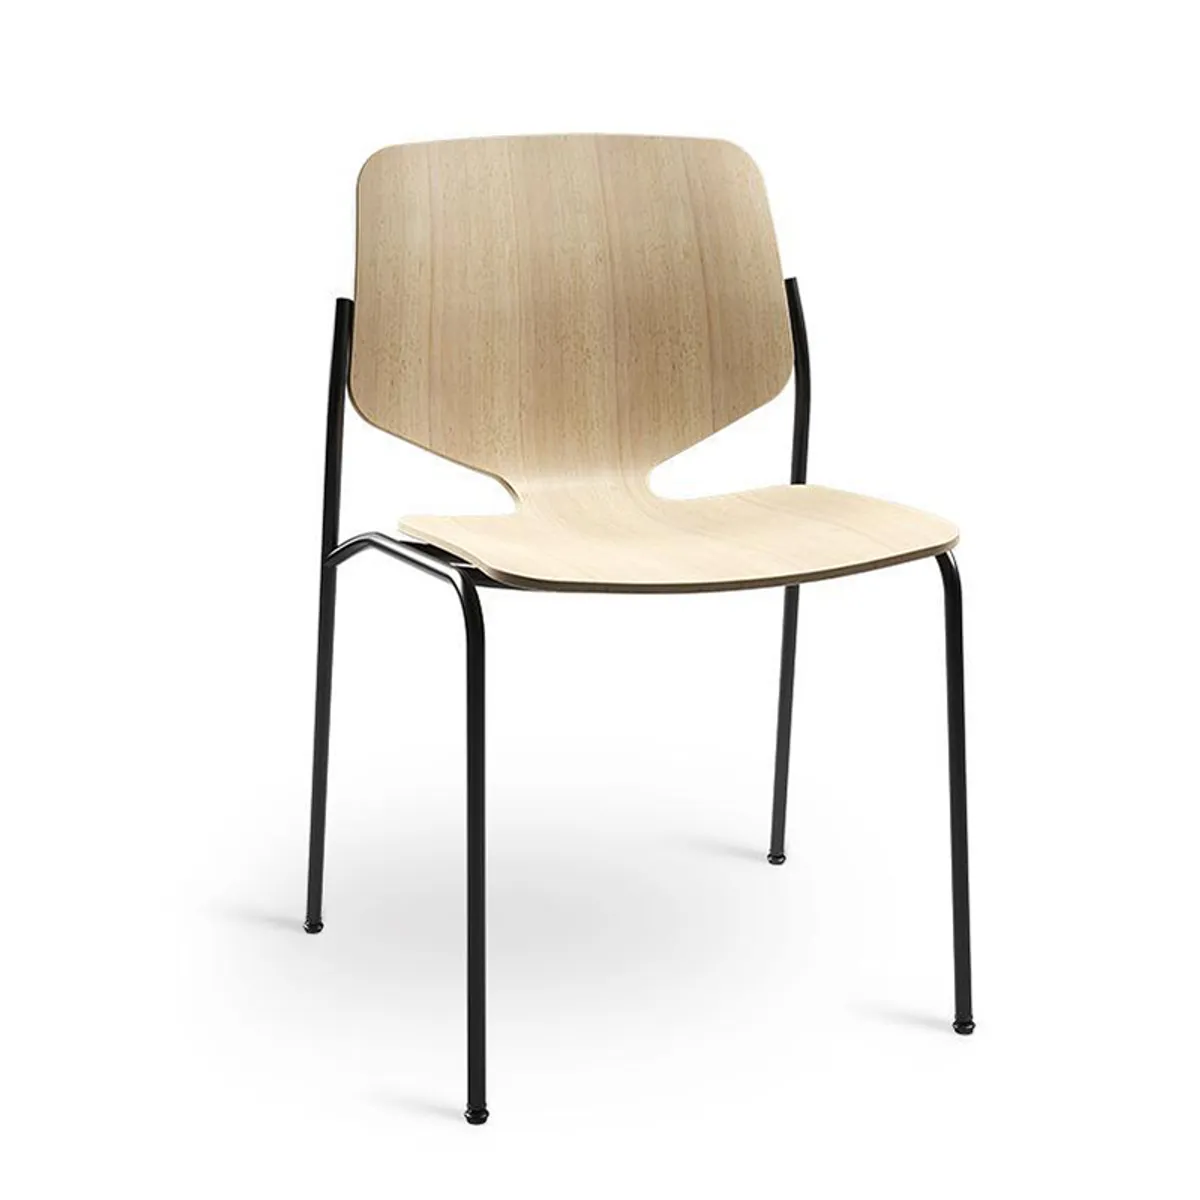 Nova Chair Recycled Furniture Cafe Dining Chair In Natural Beech And Black Metal Frame Inside Out Contracts